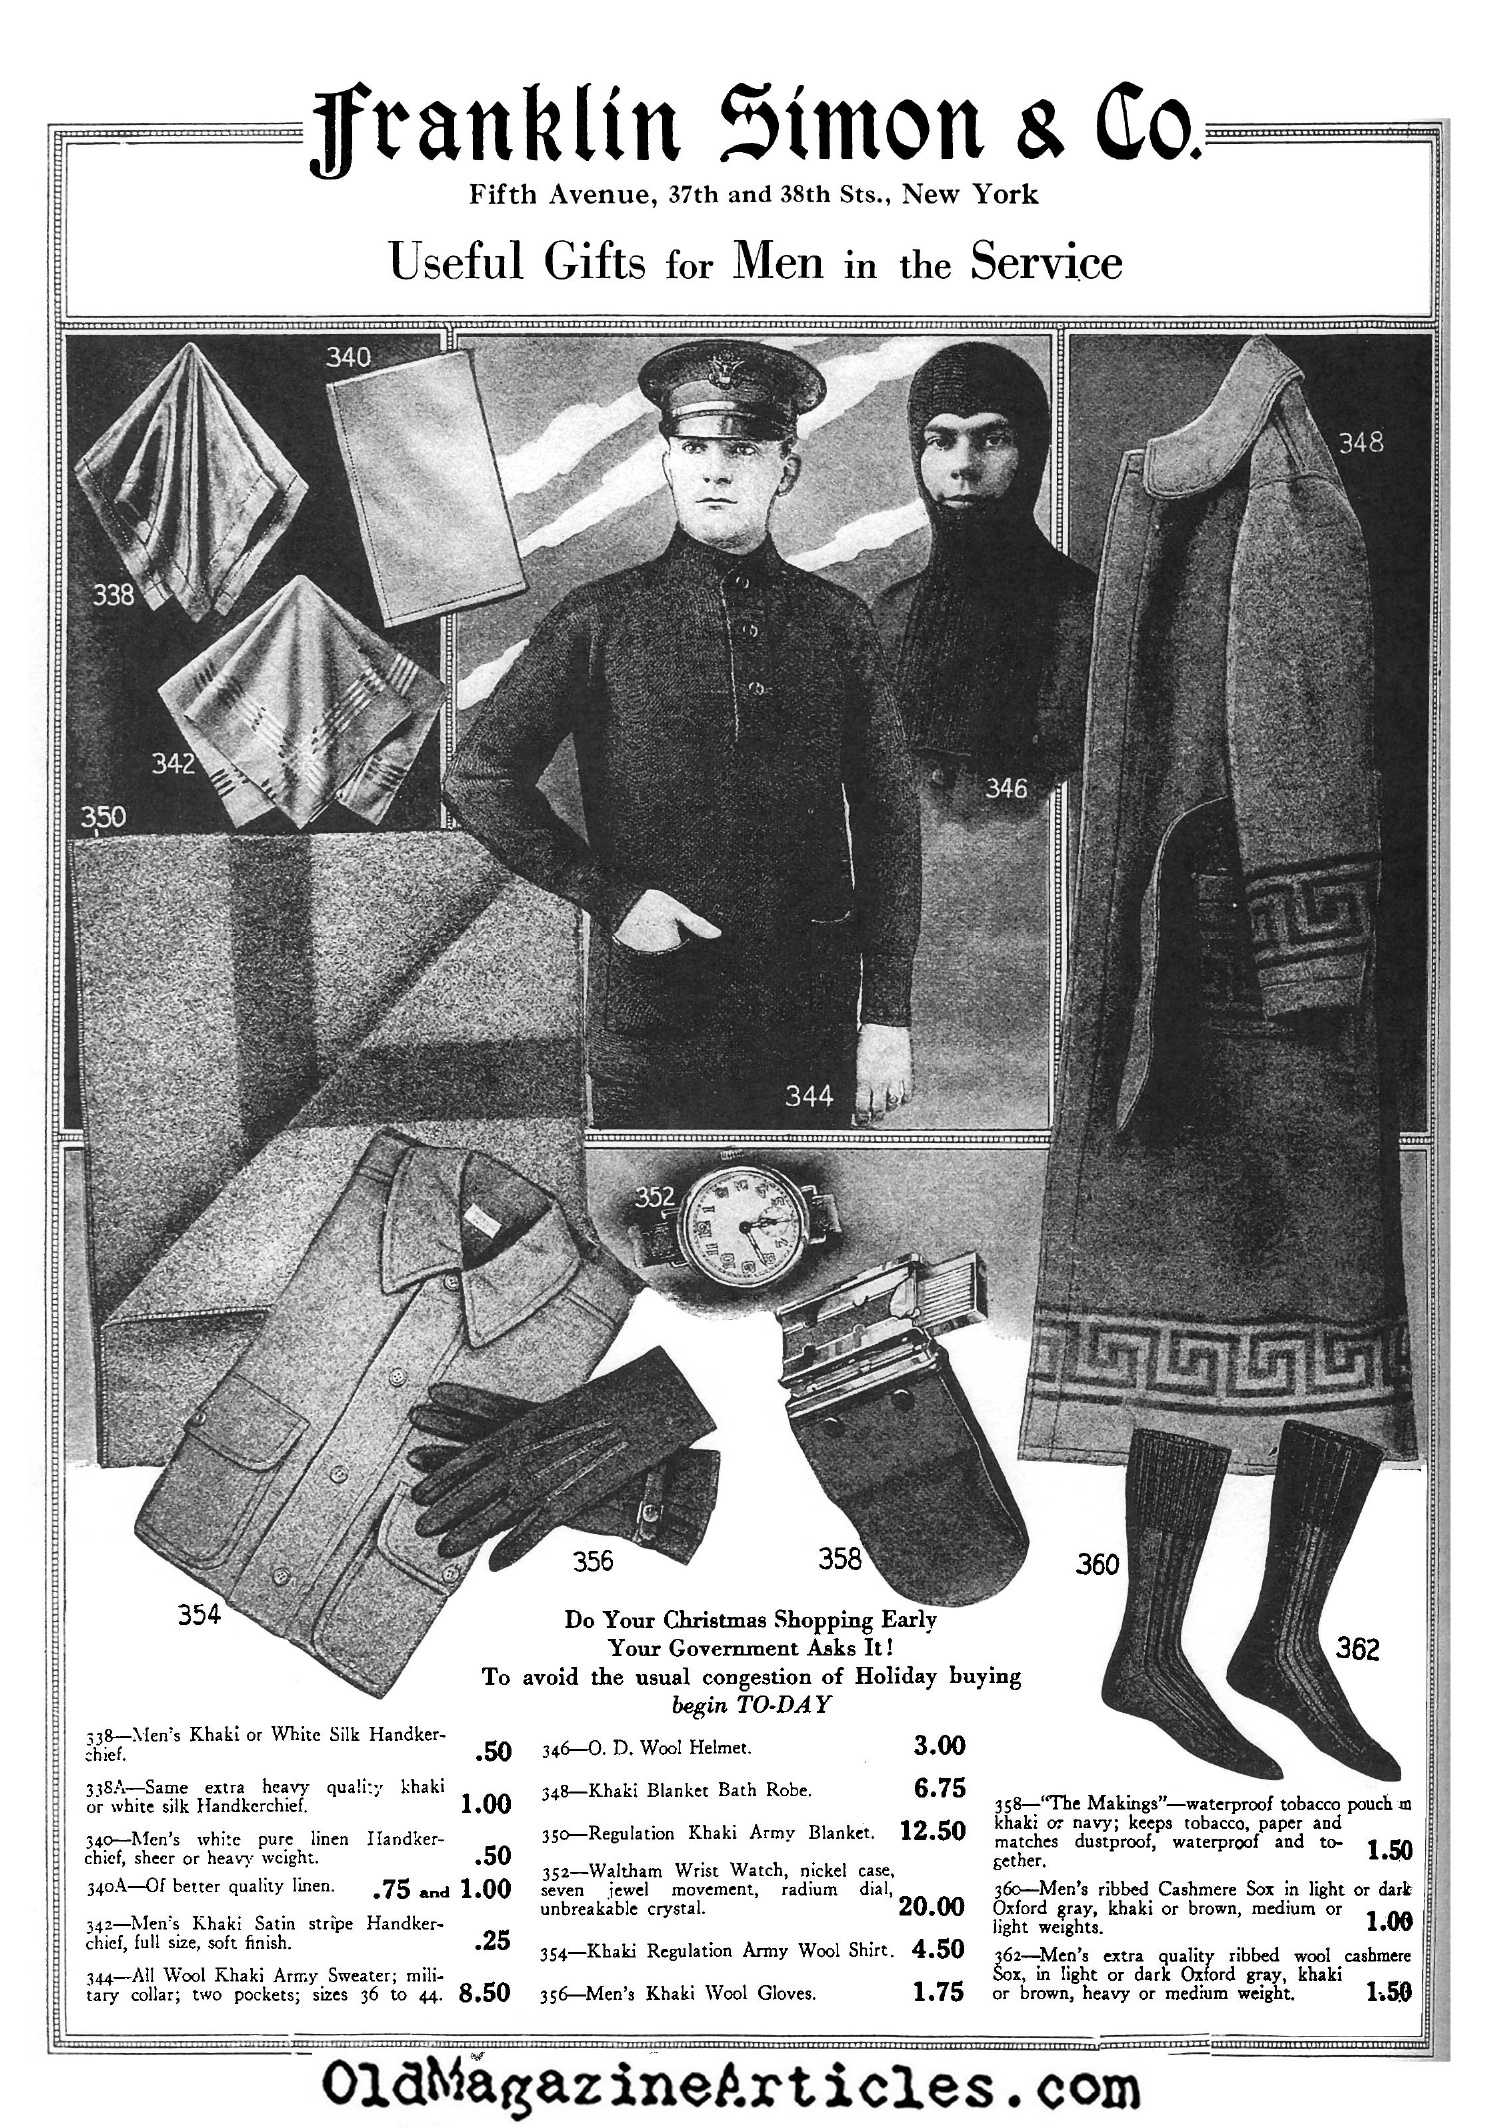 The Fifth Avenue Soldier (Advertisement, 1918)